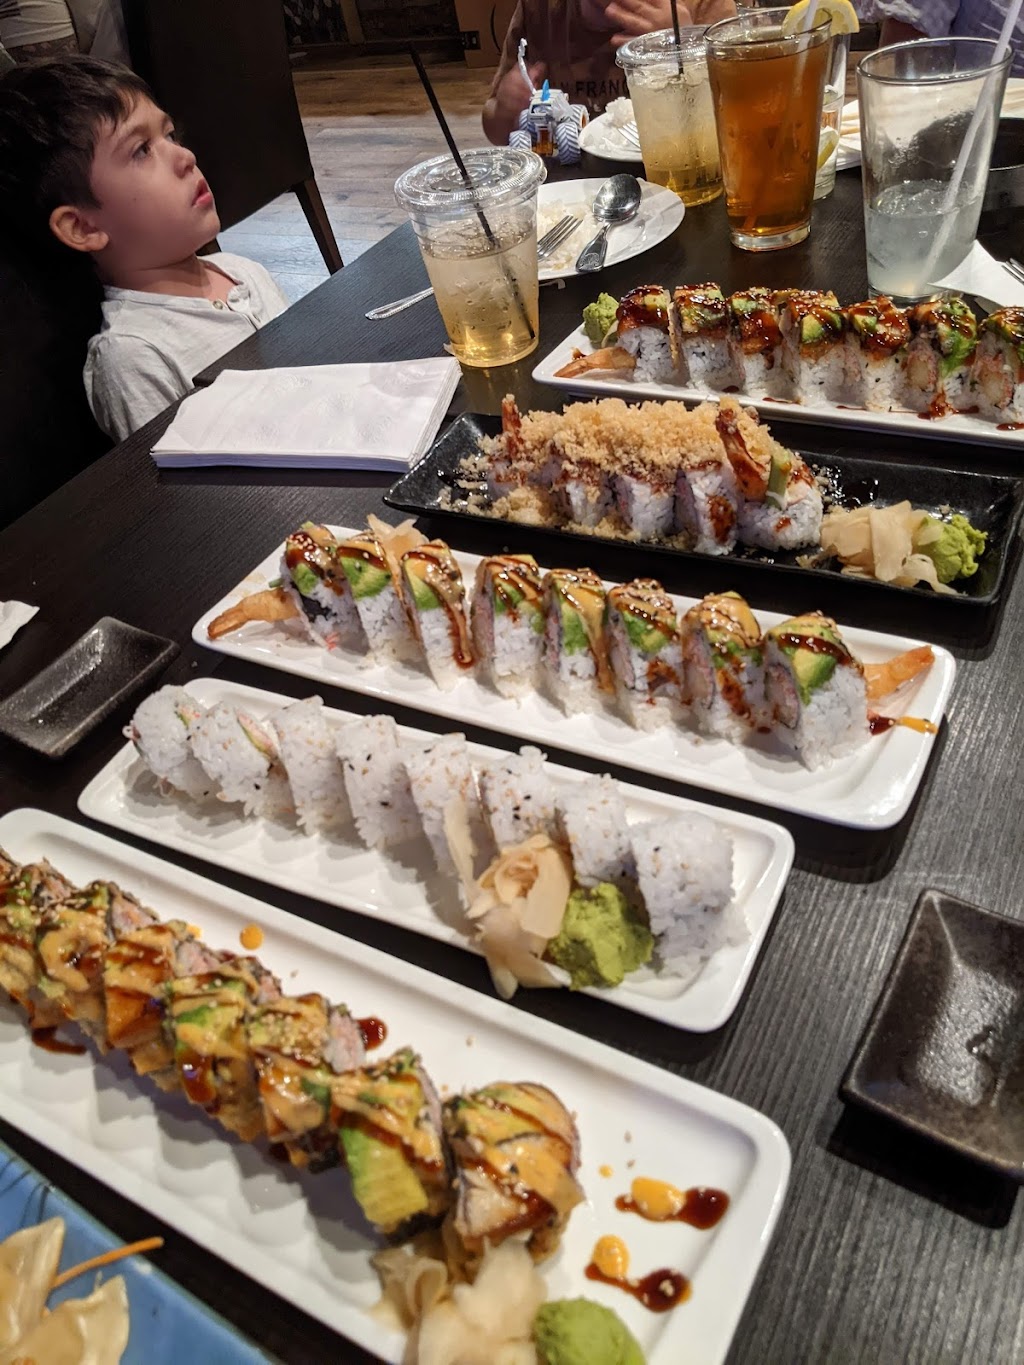 Misaka Sushi | 380 W Country Club Dr suite j, Brentwood, CA 94513 | Phone: (925) 679-4890